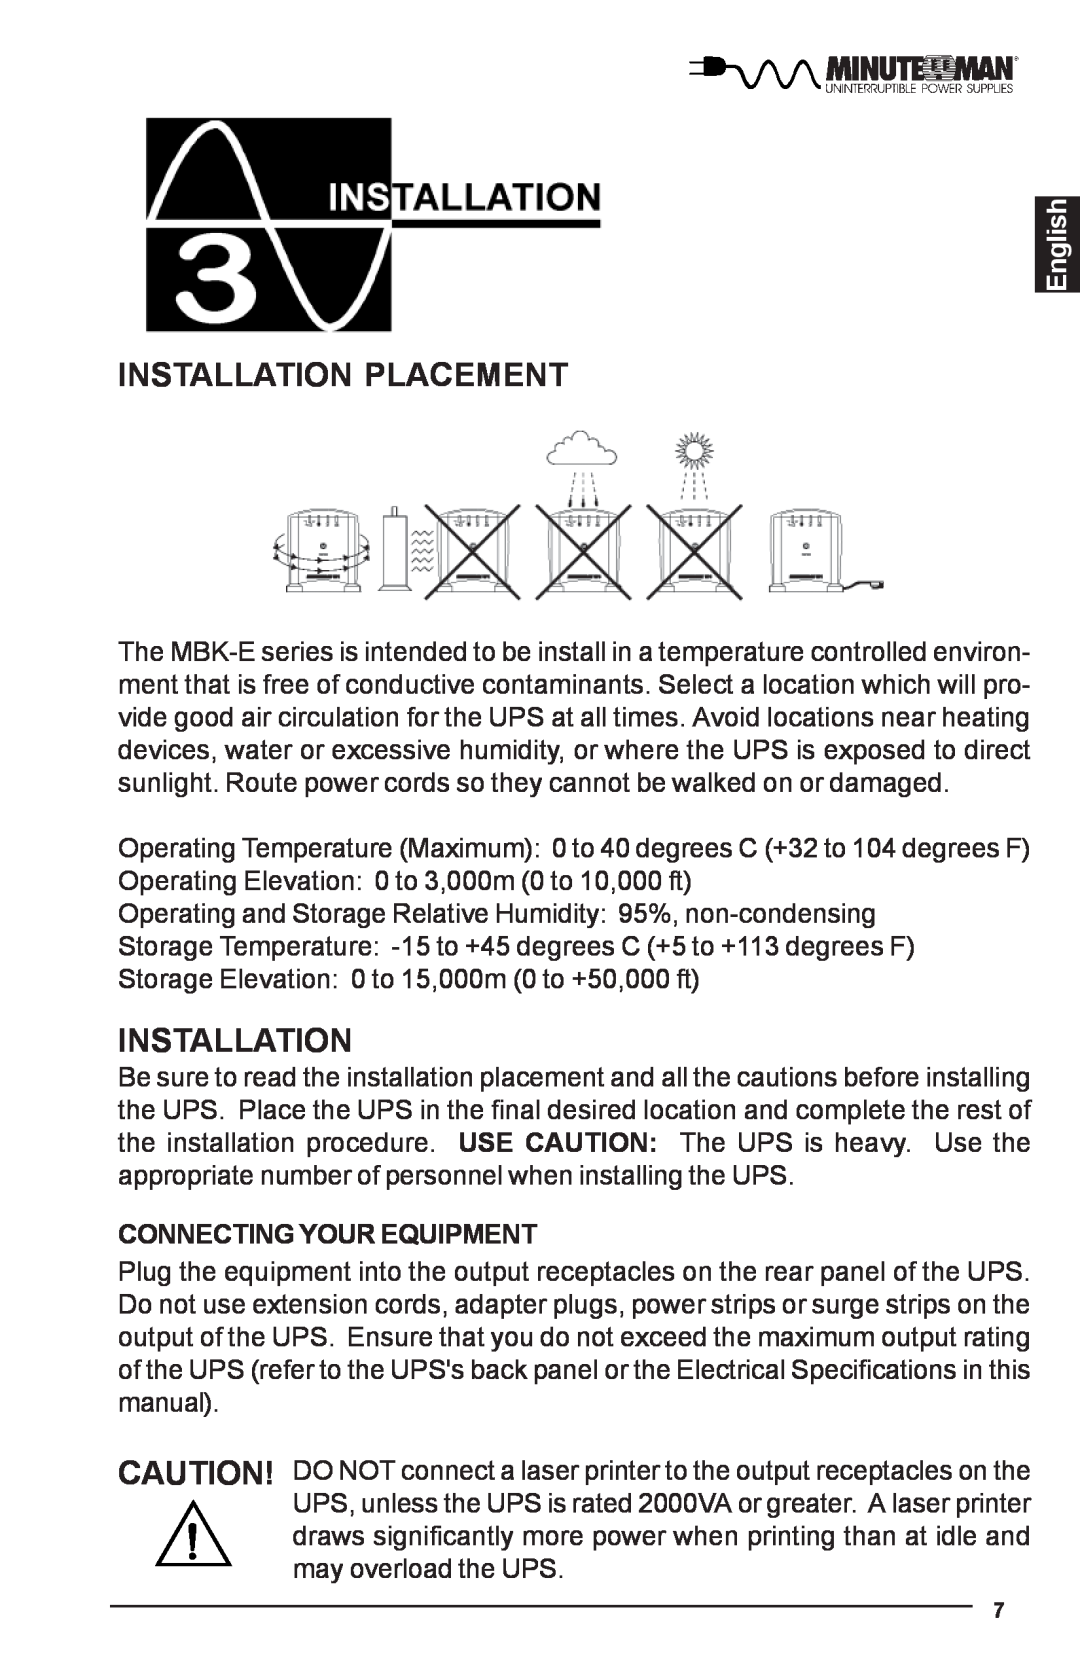 Minuteman UPS MBK-E SERIES user manual Installation Placement, English, Connecting Your Equipment 